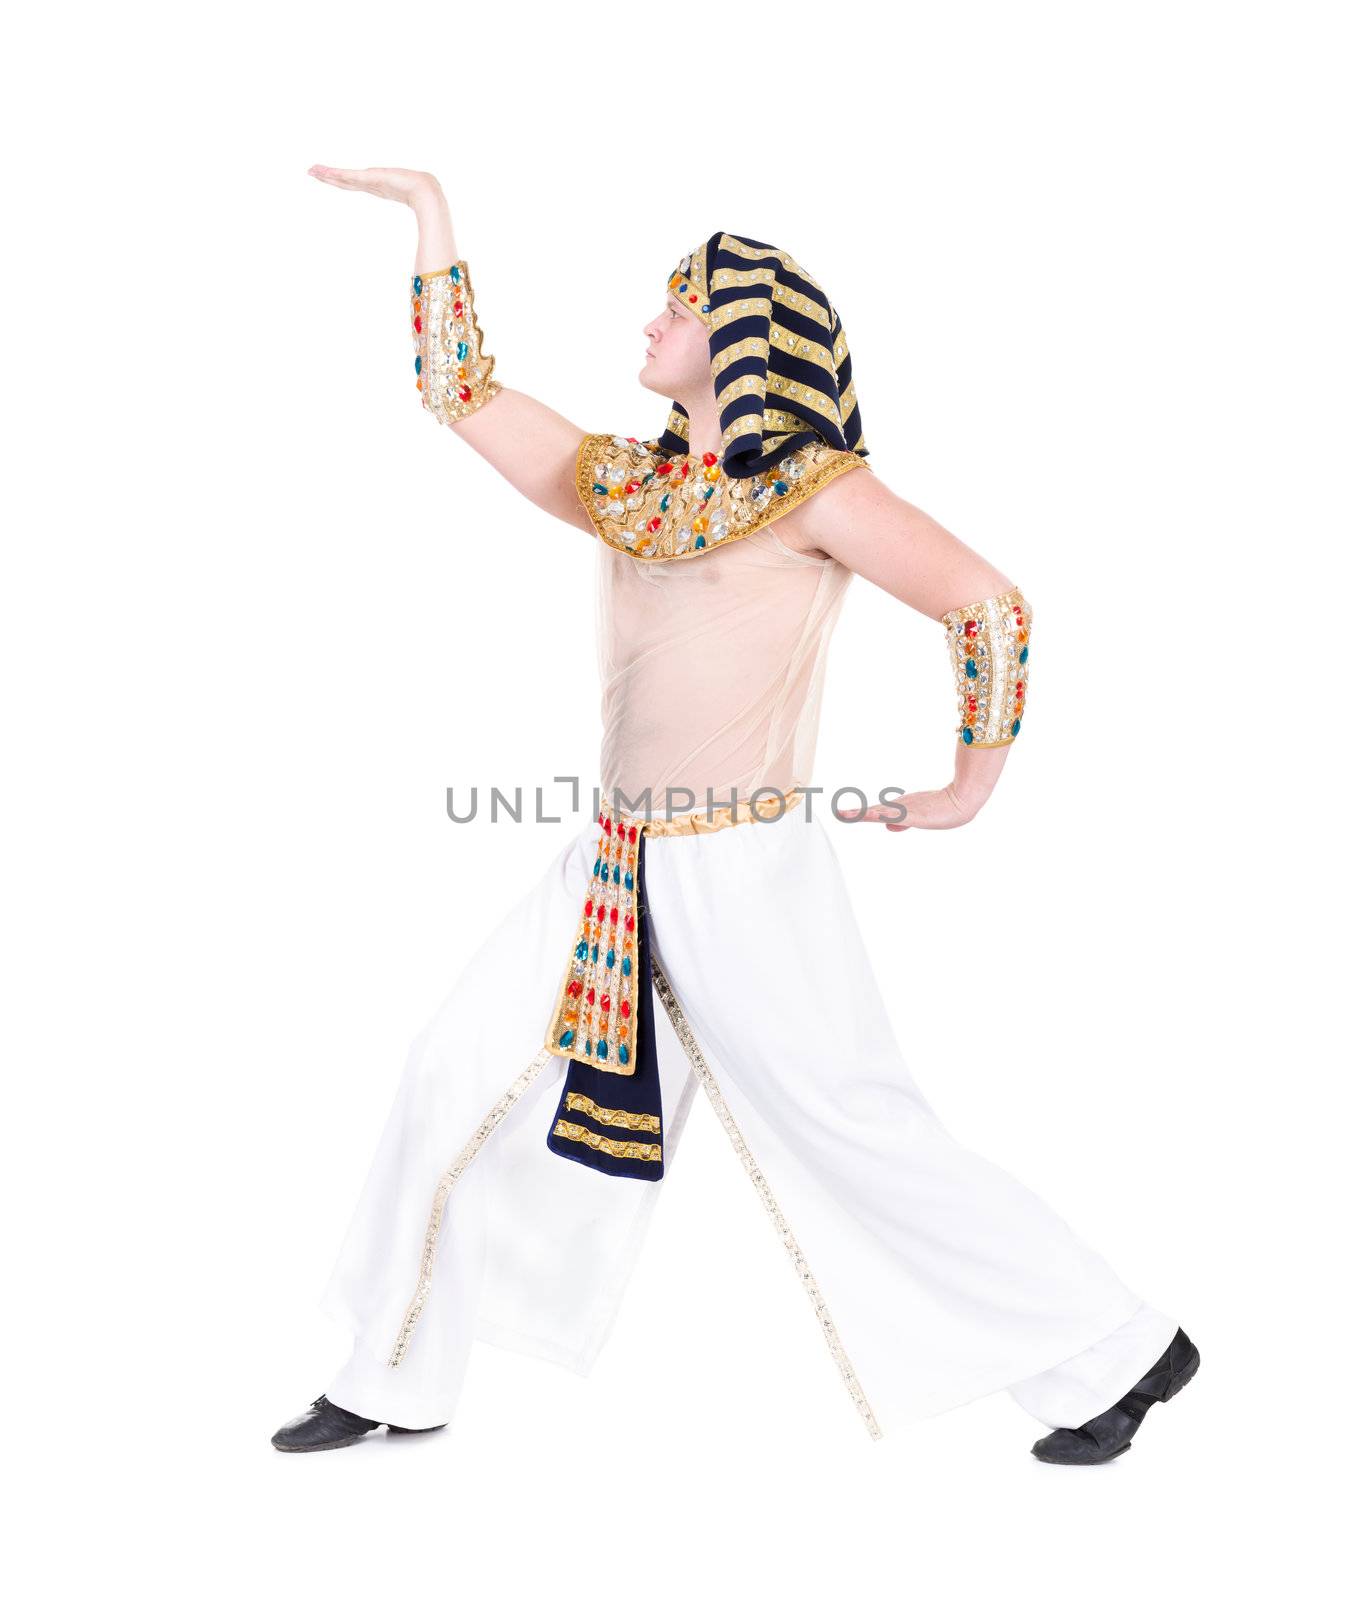 Dancing pharaoh wearing a egyptian costume. Isolated on white background in full length.